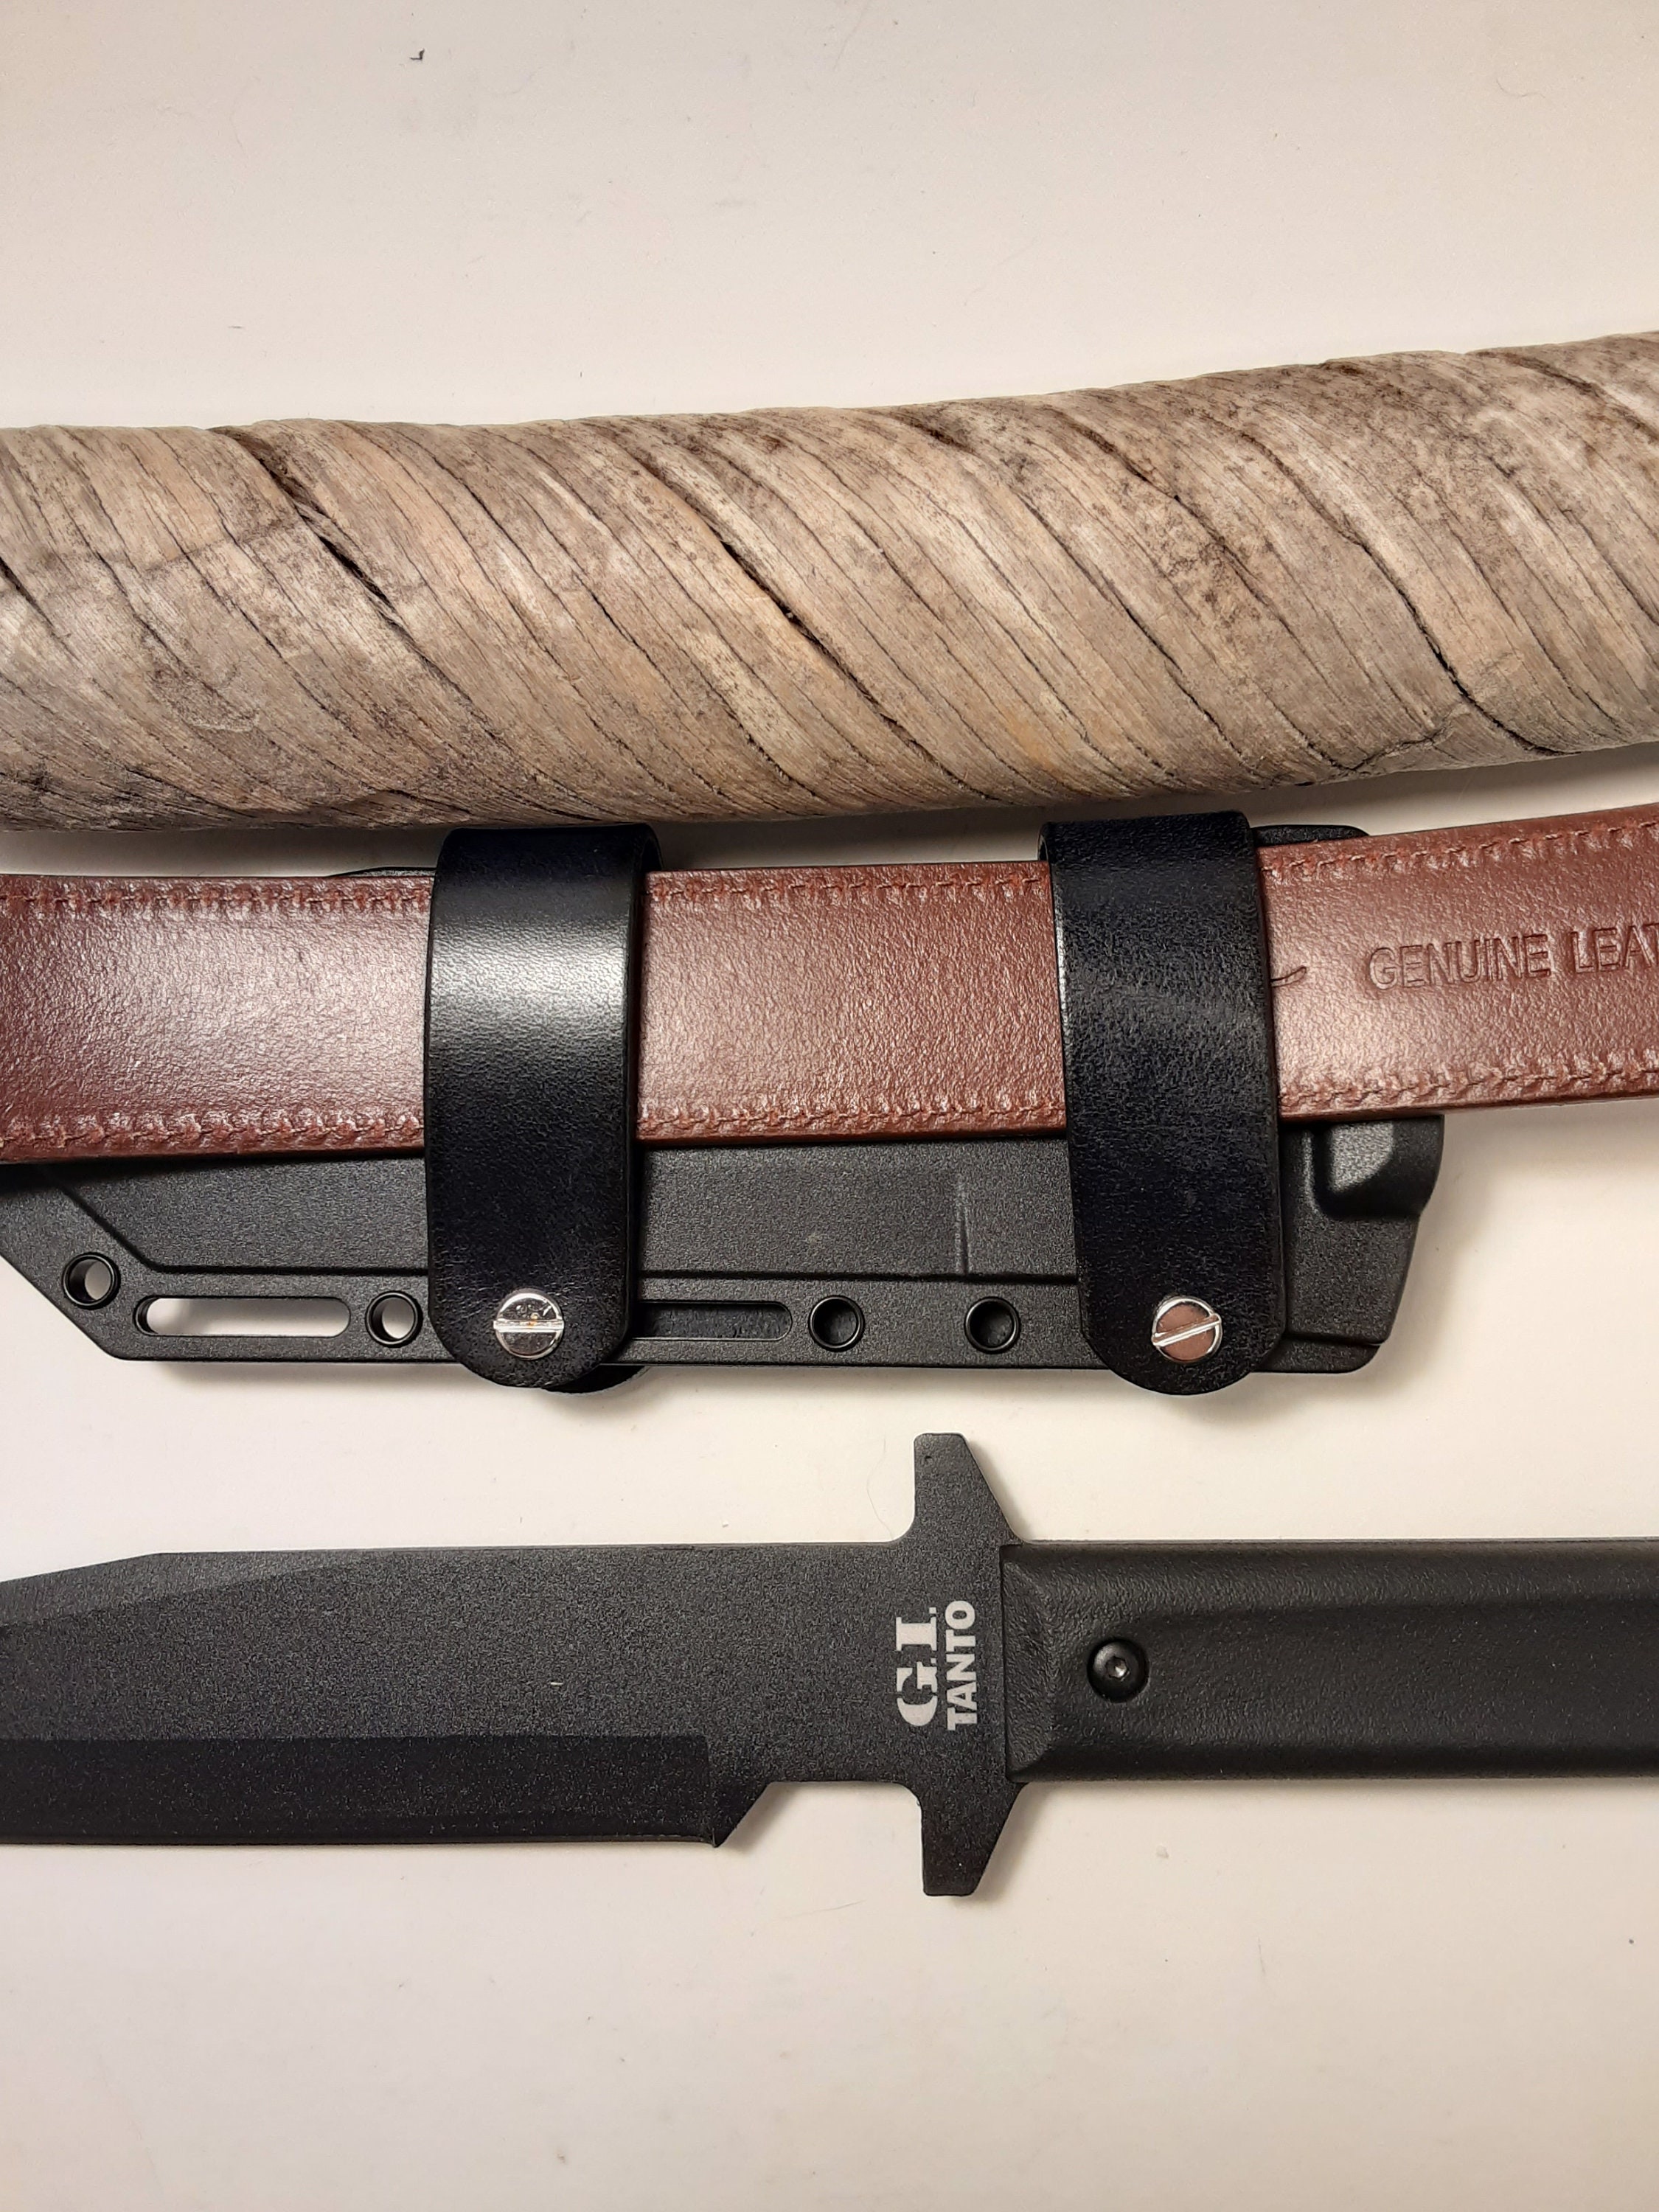 Leather & Kydex Drop Leg for Cold Steel GI Tanto (no Knife Or